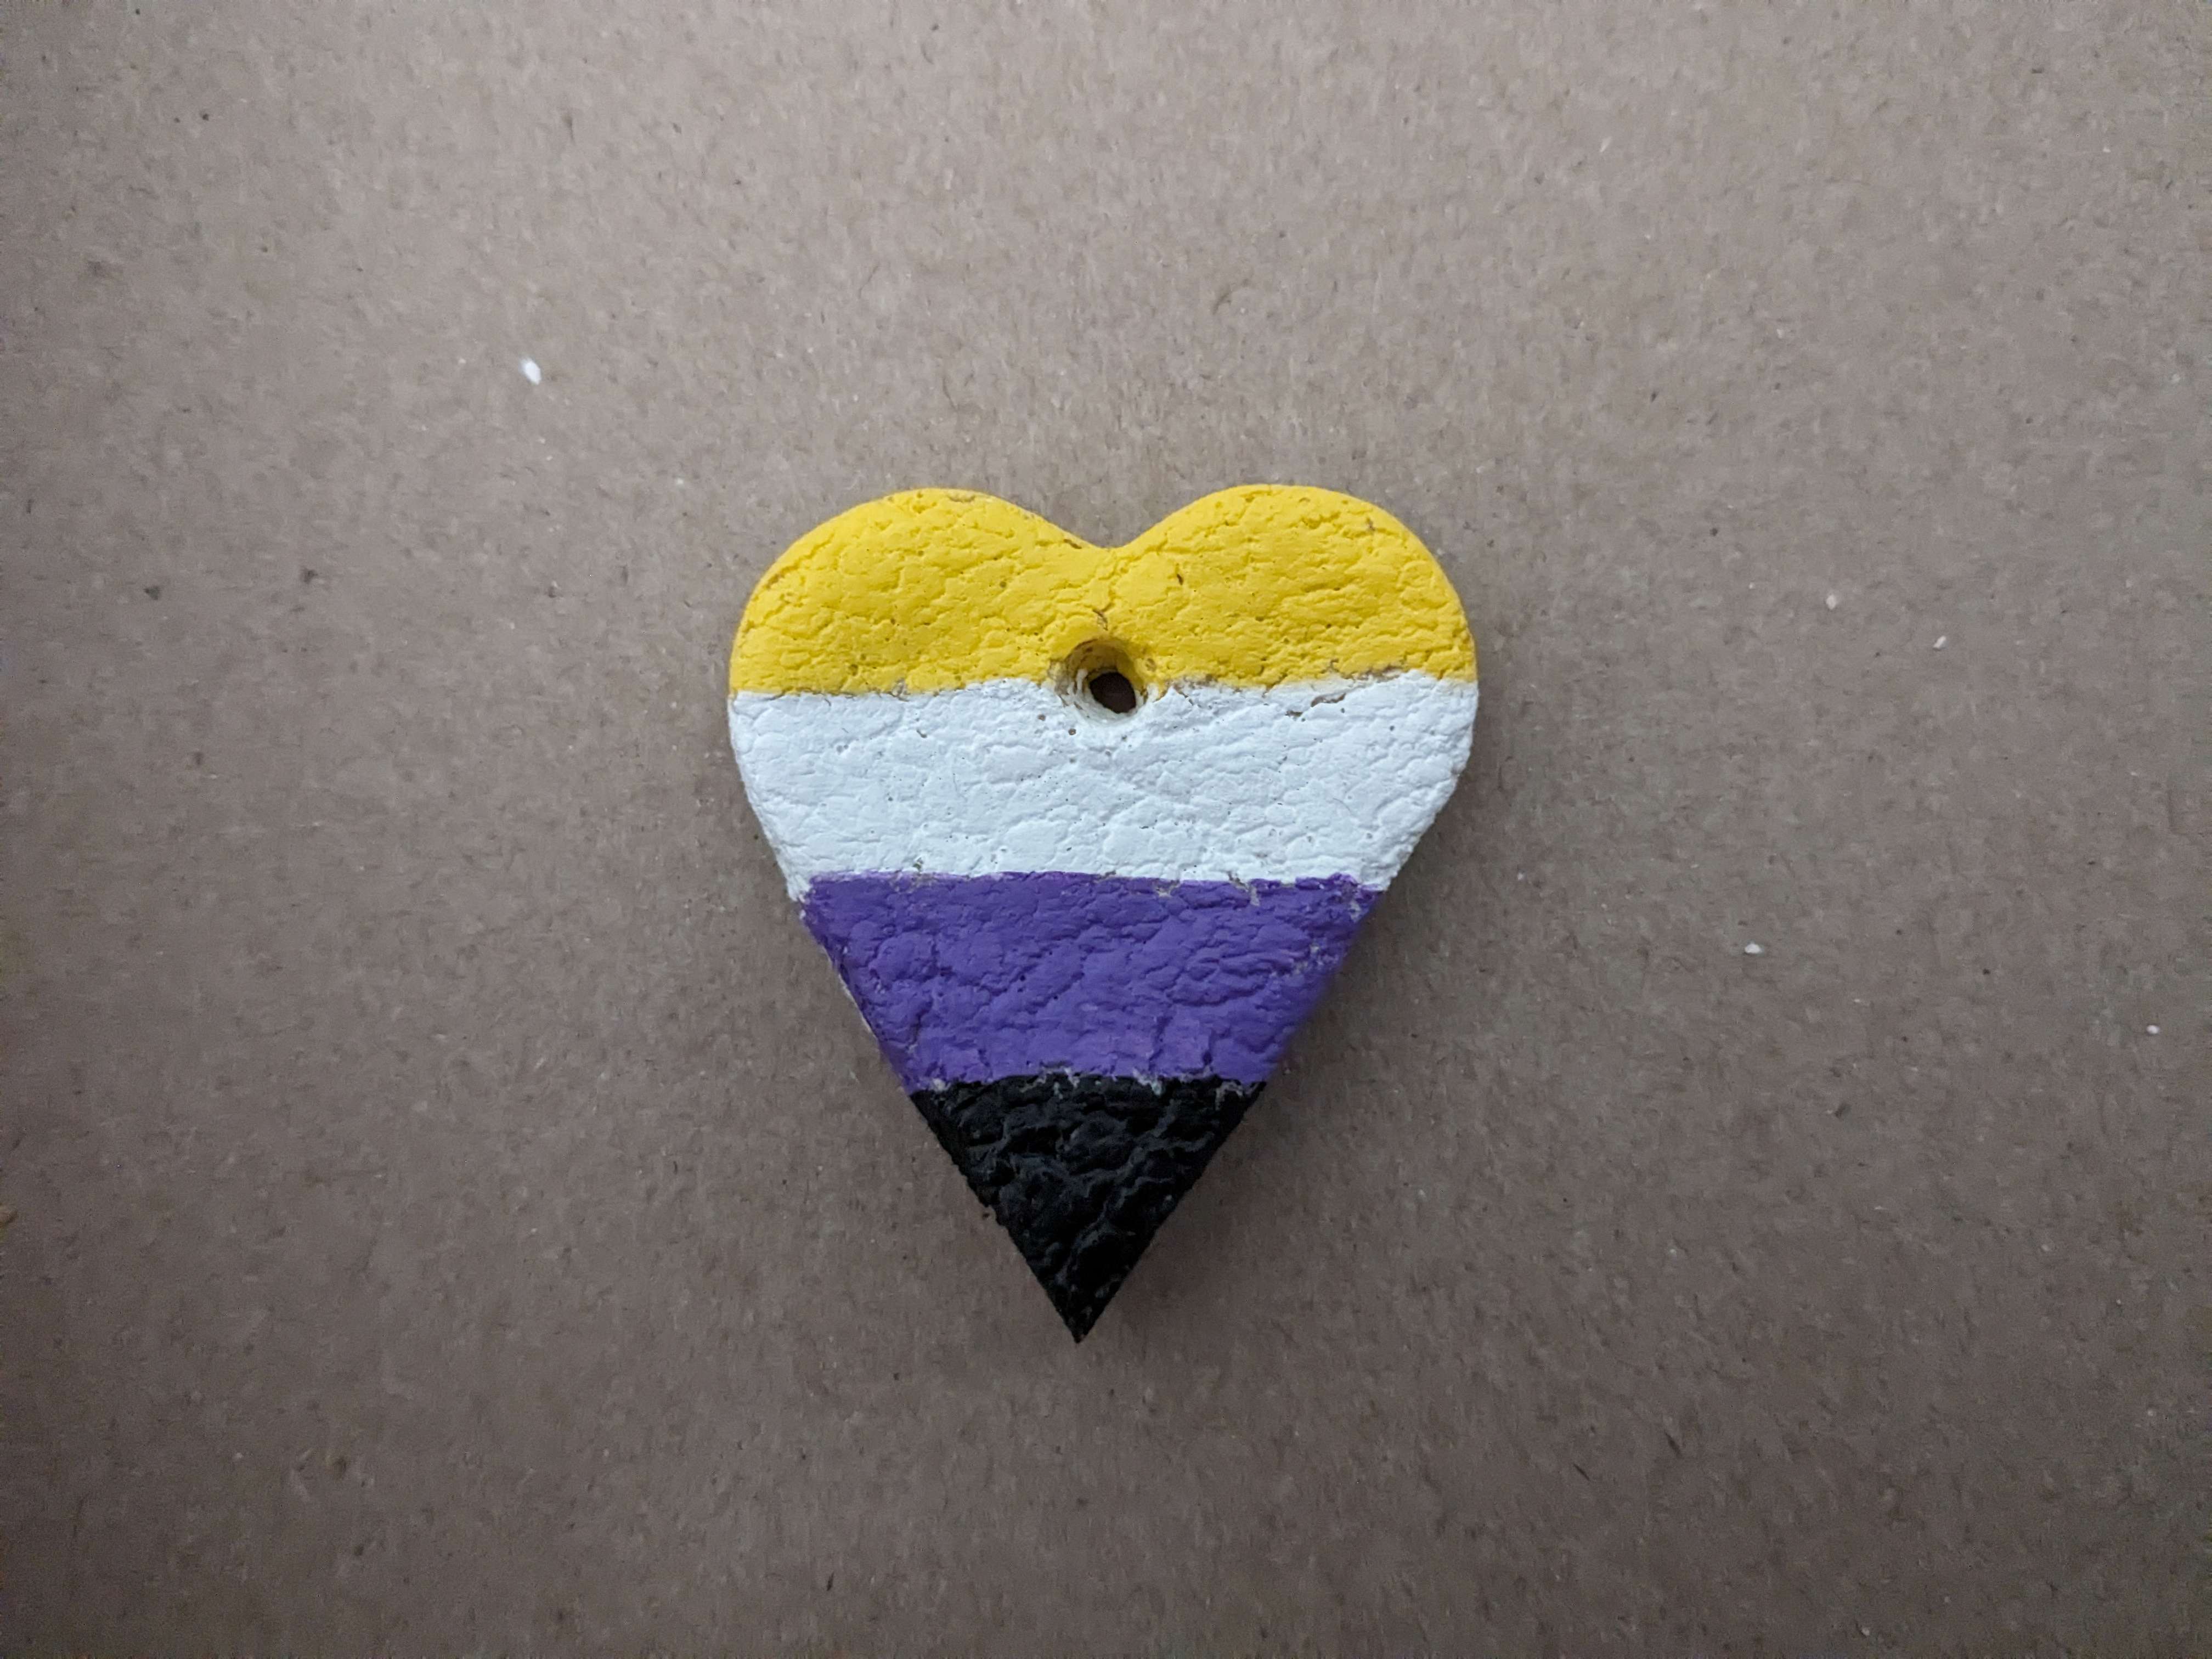 Heart ornament painted like the nonbinary flag sitting on a thin cardboard backdrop.